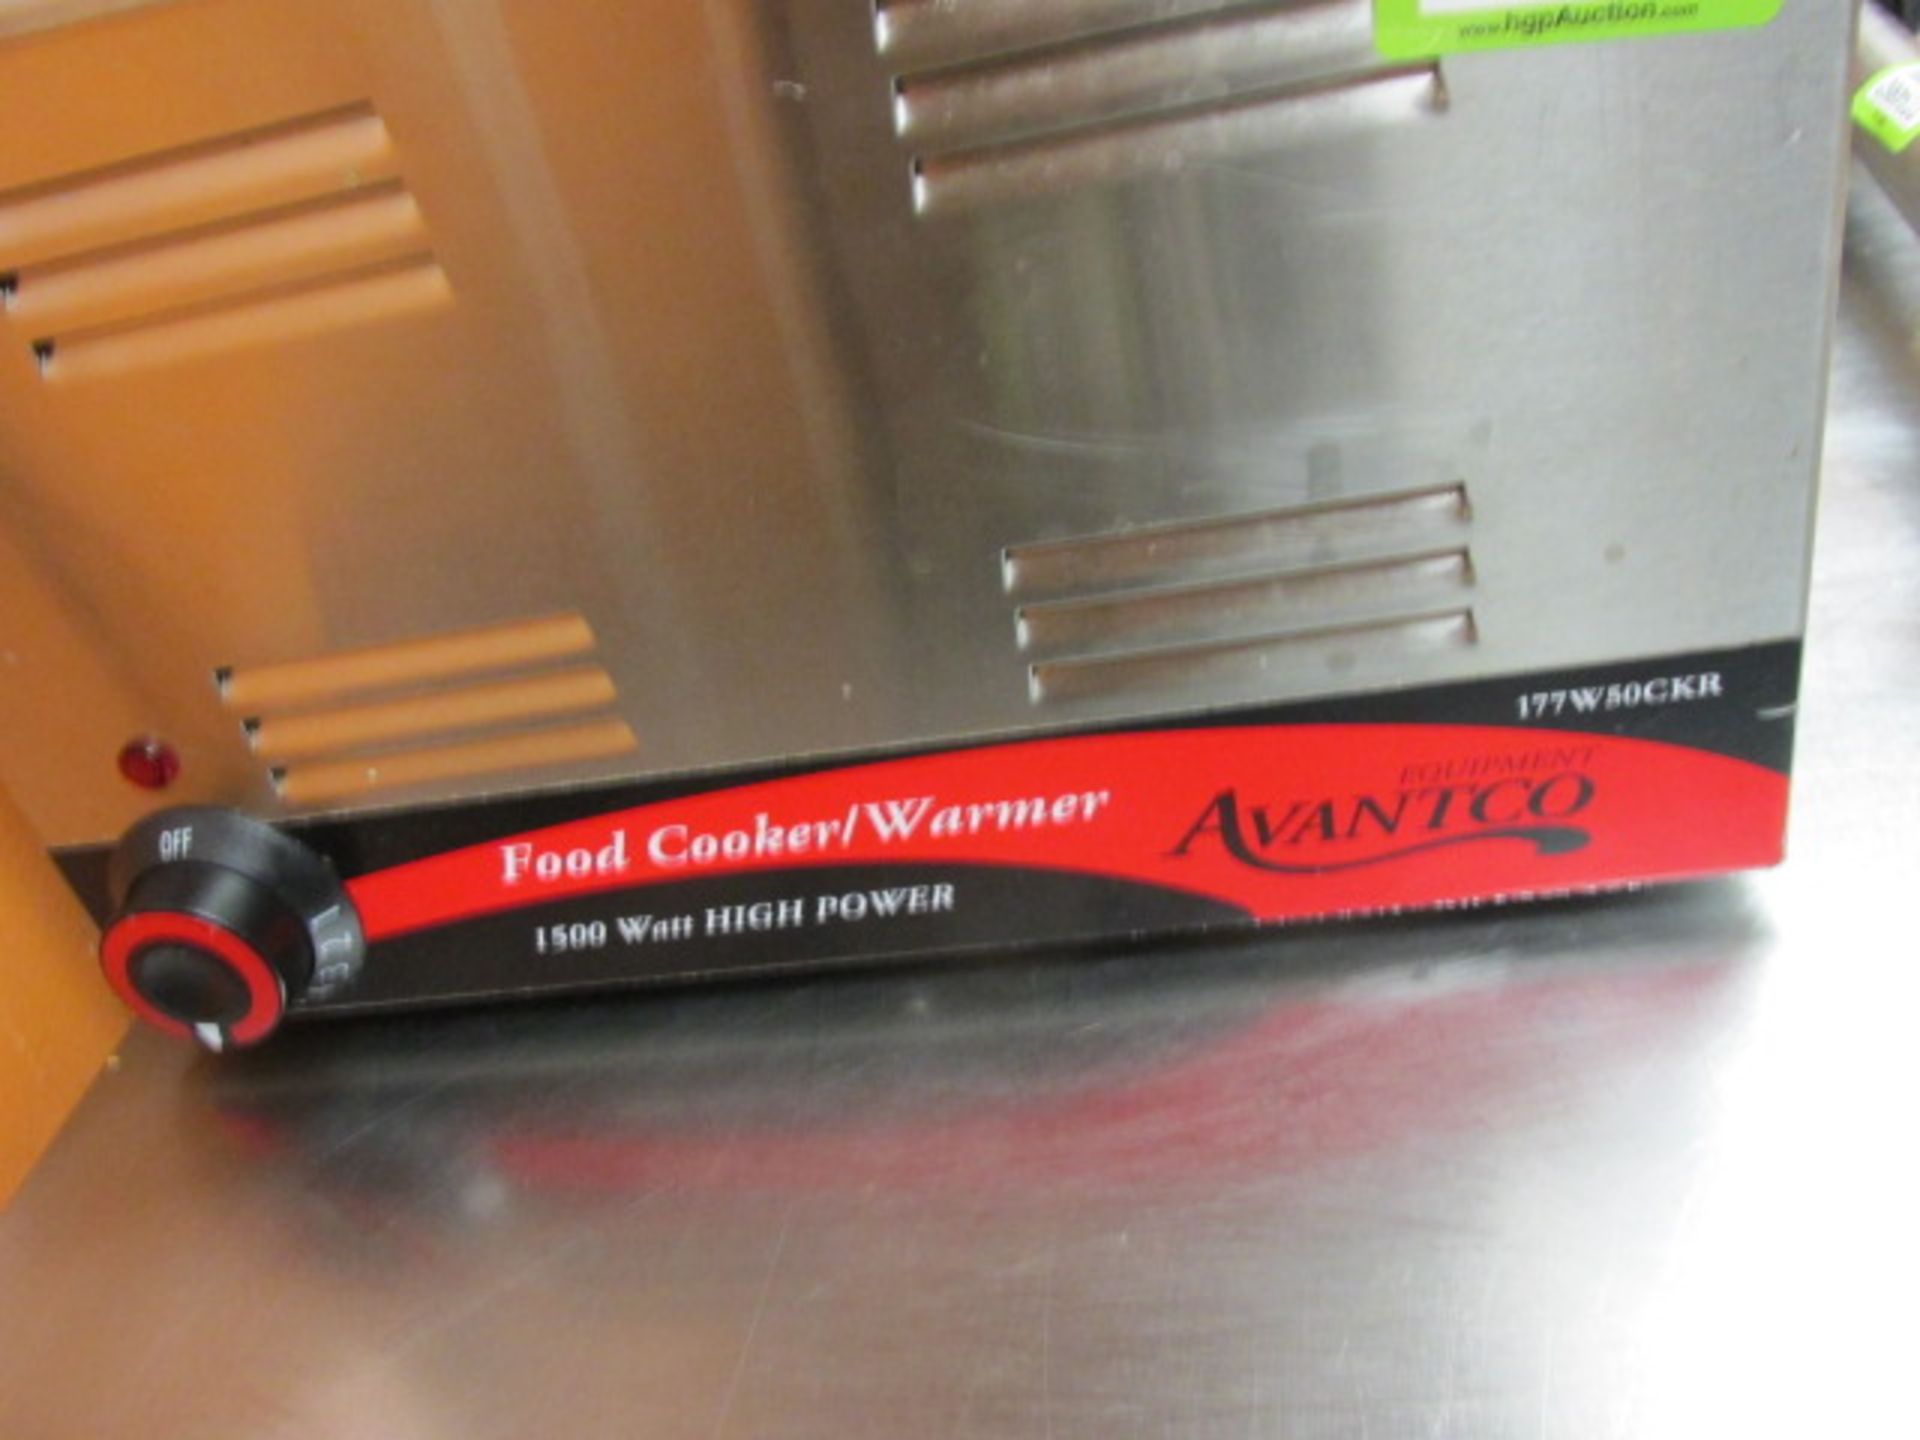 Avantco Food Cooker/Warmer, 117W, 50 KR, 1500w. HIT# 2234861. Loc: Kitchen Asset Located at 143 Kent - Image 2 of 3